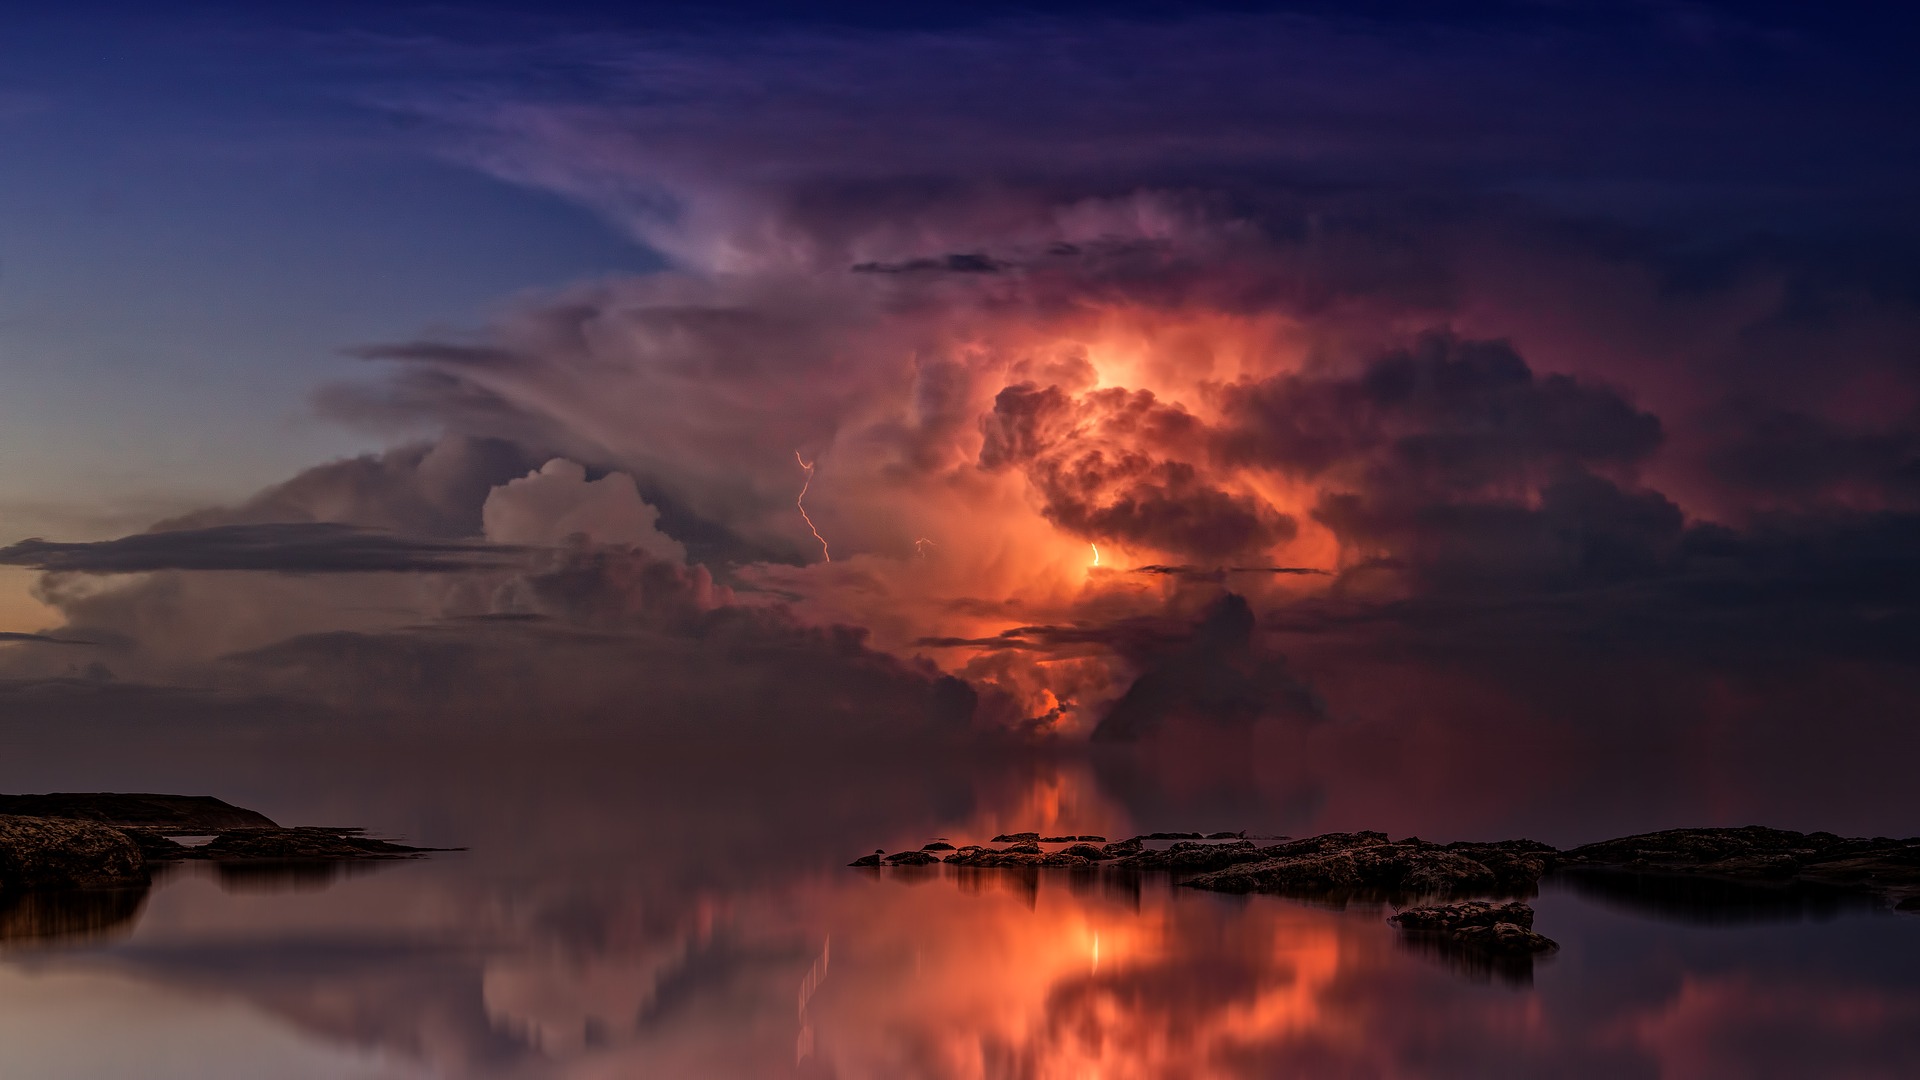 Storm Clouds over the Ocean by Johannes Plenio